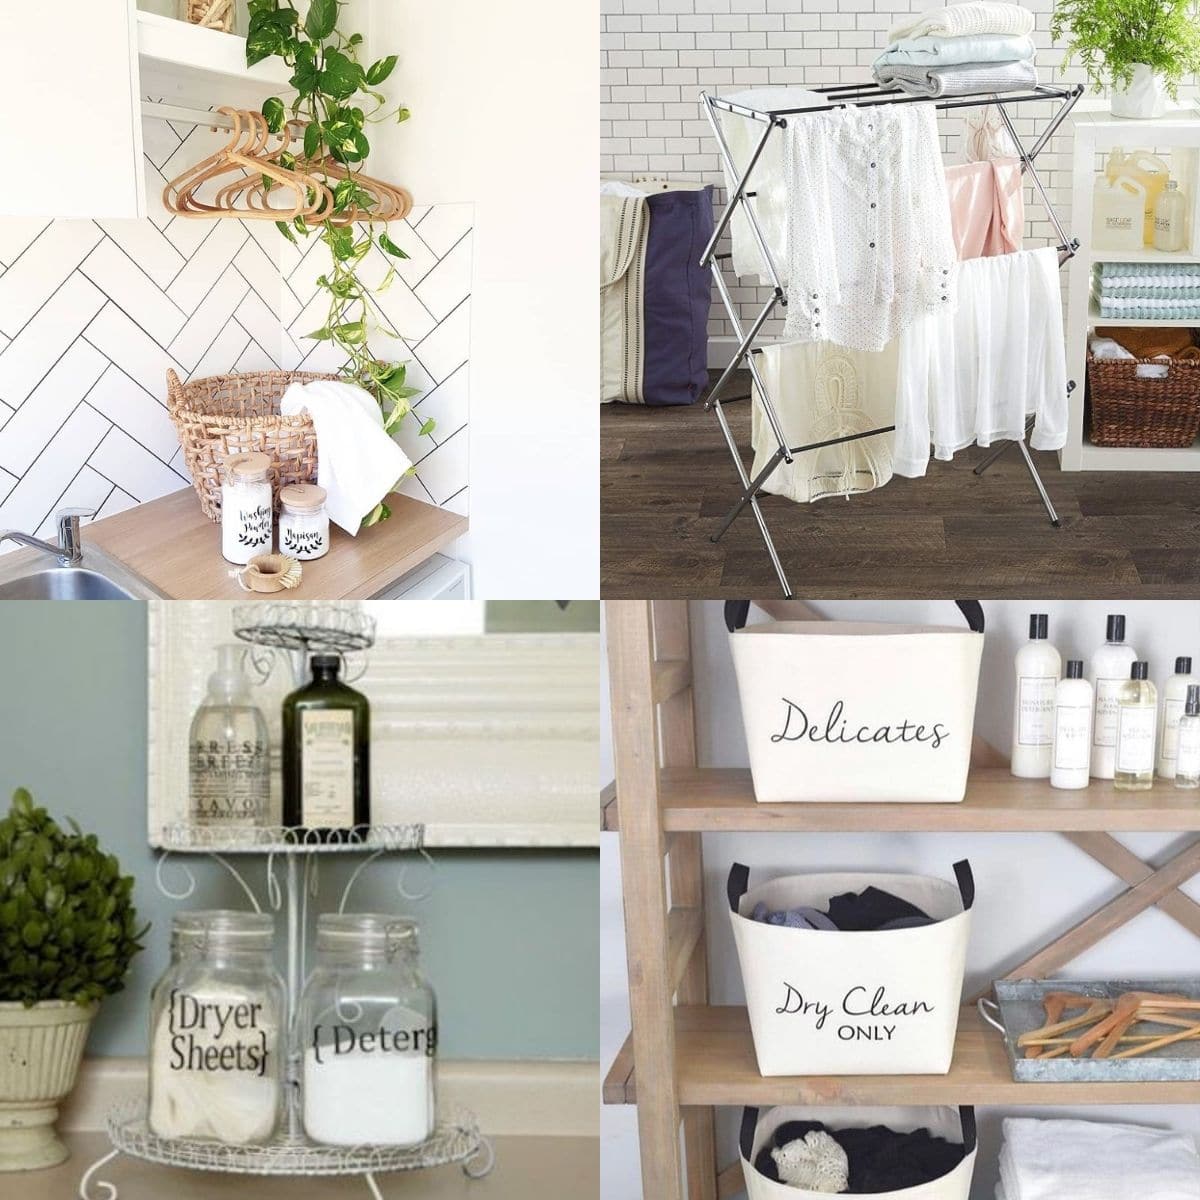 Laundry room can get messy!

Use these storage hacks to keep your laundry room neat and beautiful. 😉

#Storage #StorageIdeas #LaundryRoomStorage #LaundryRoomStorageIdeas
 #kimblue #realtor
 LocalInfoForYou.com/277115/laundry…